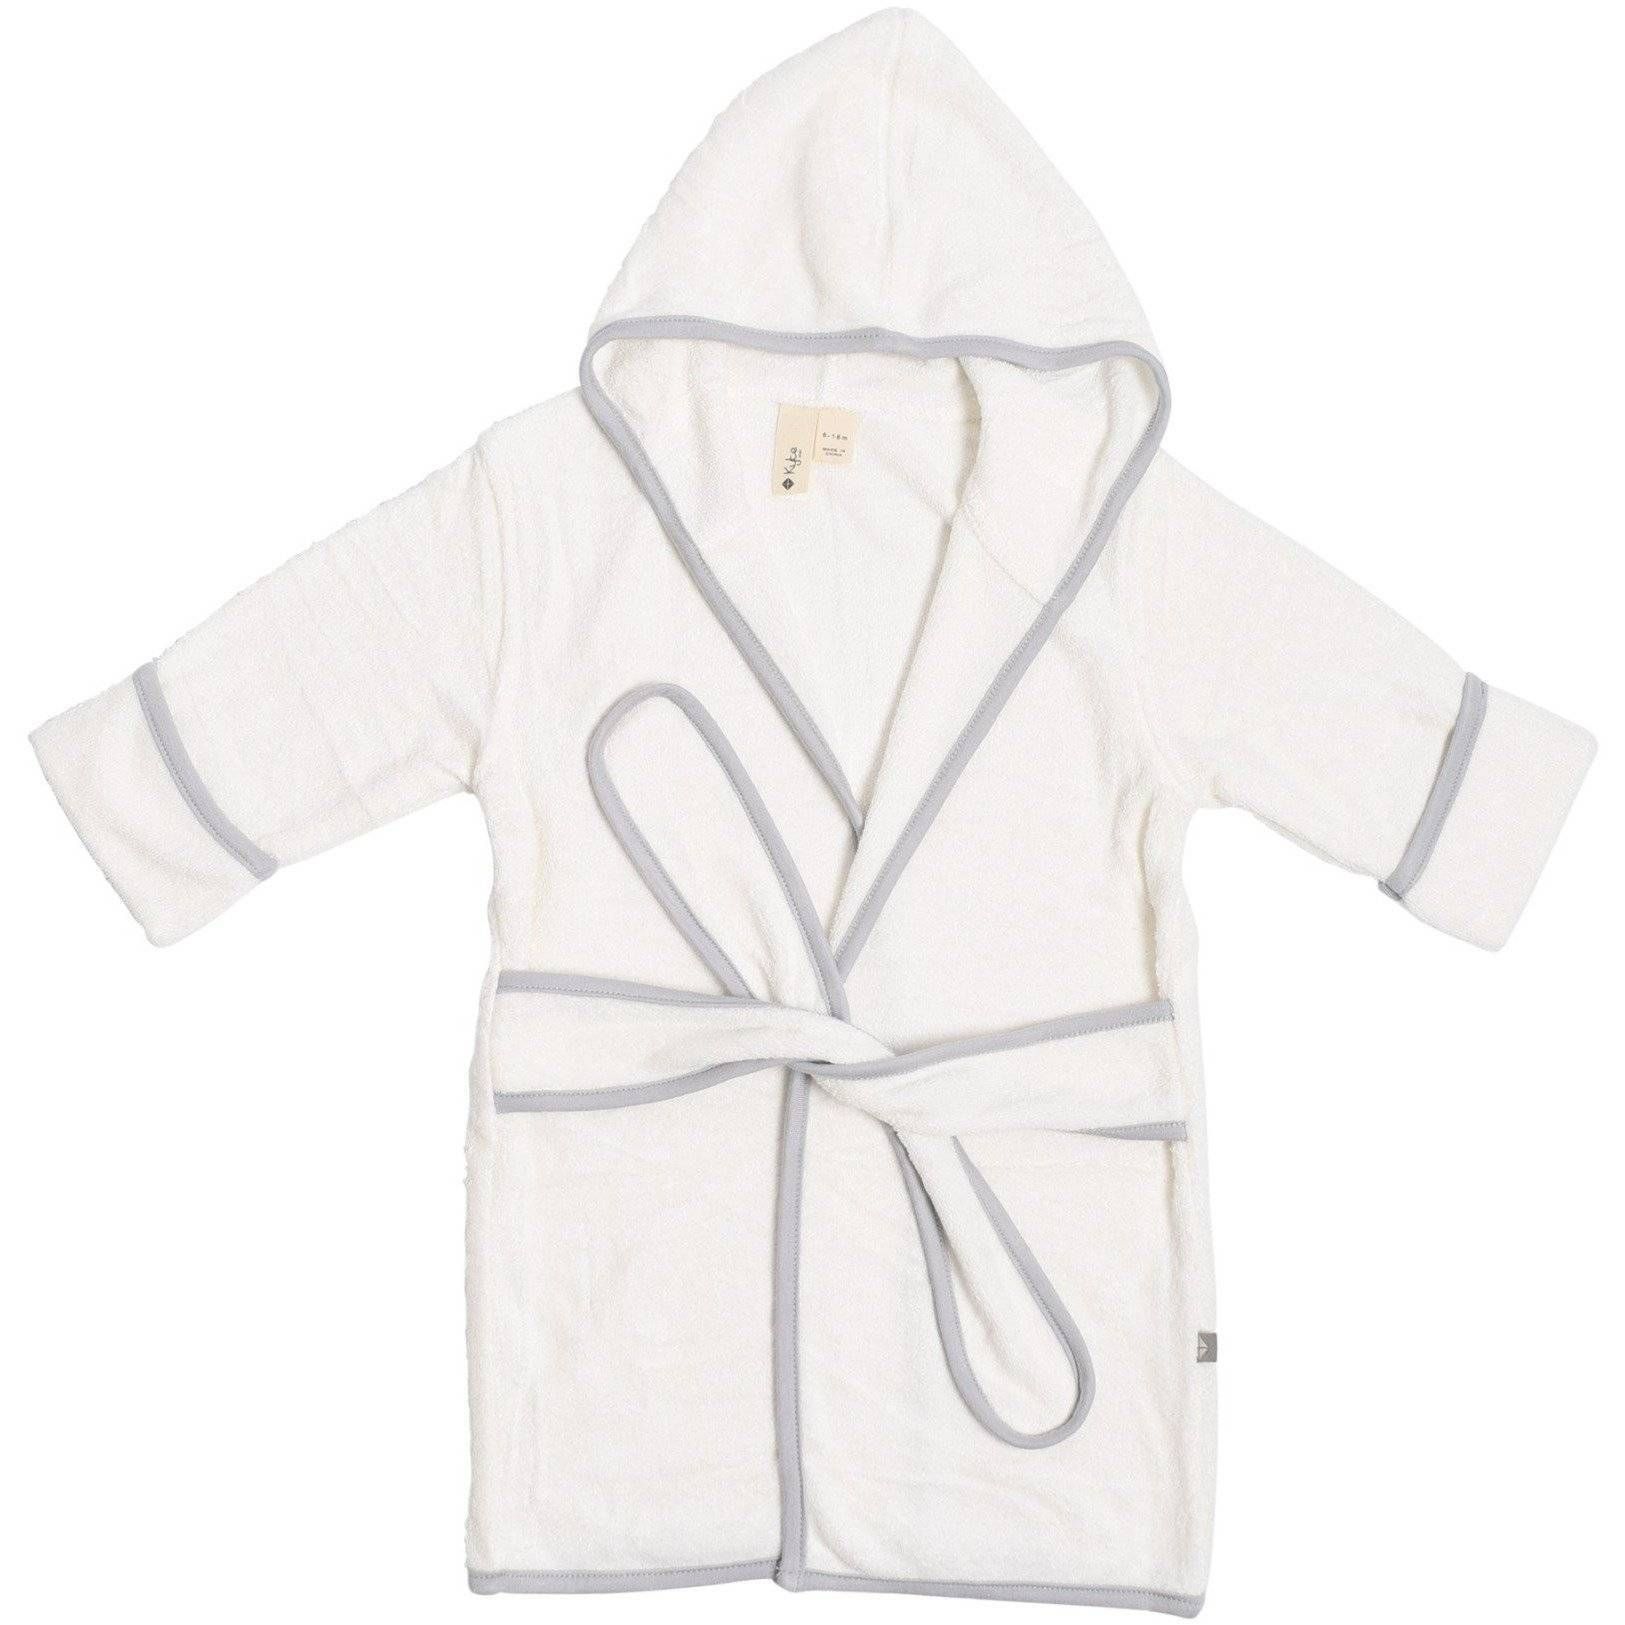 Toddler Bath Robe in Cloud with Storm Trim | Kyte BABY